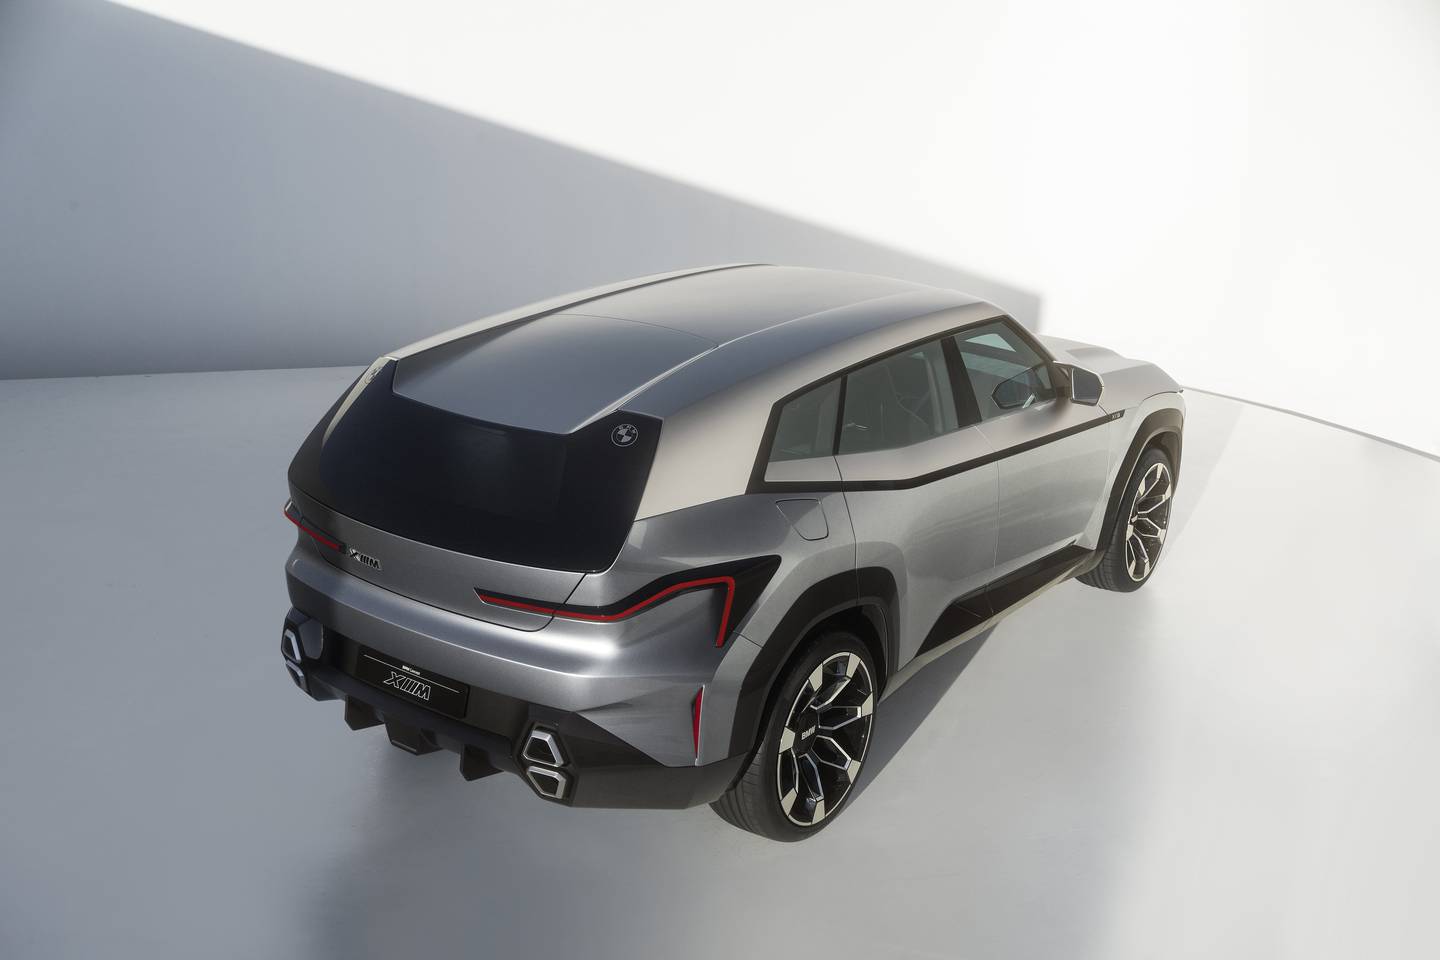 The production-spec XM will be 95 per cent similar to the concept car.